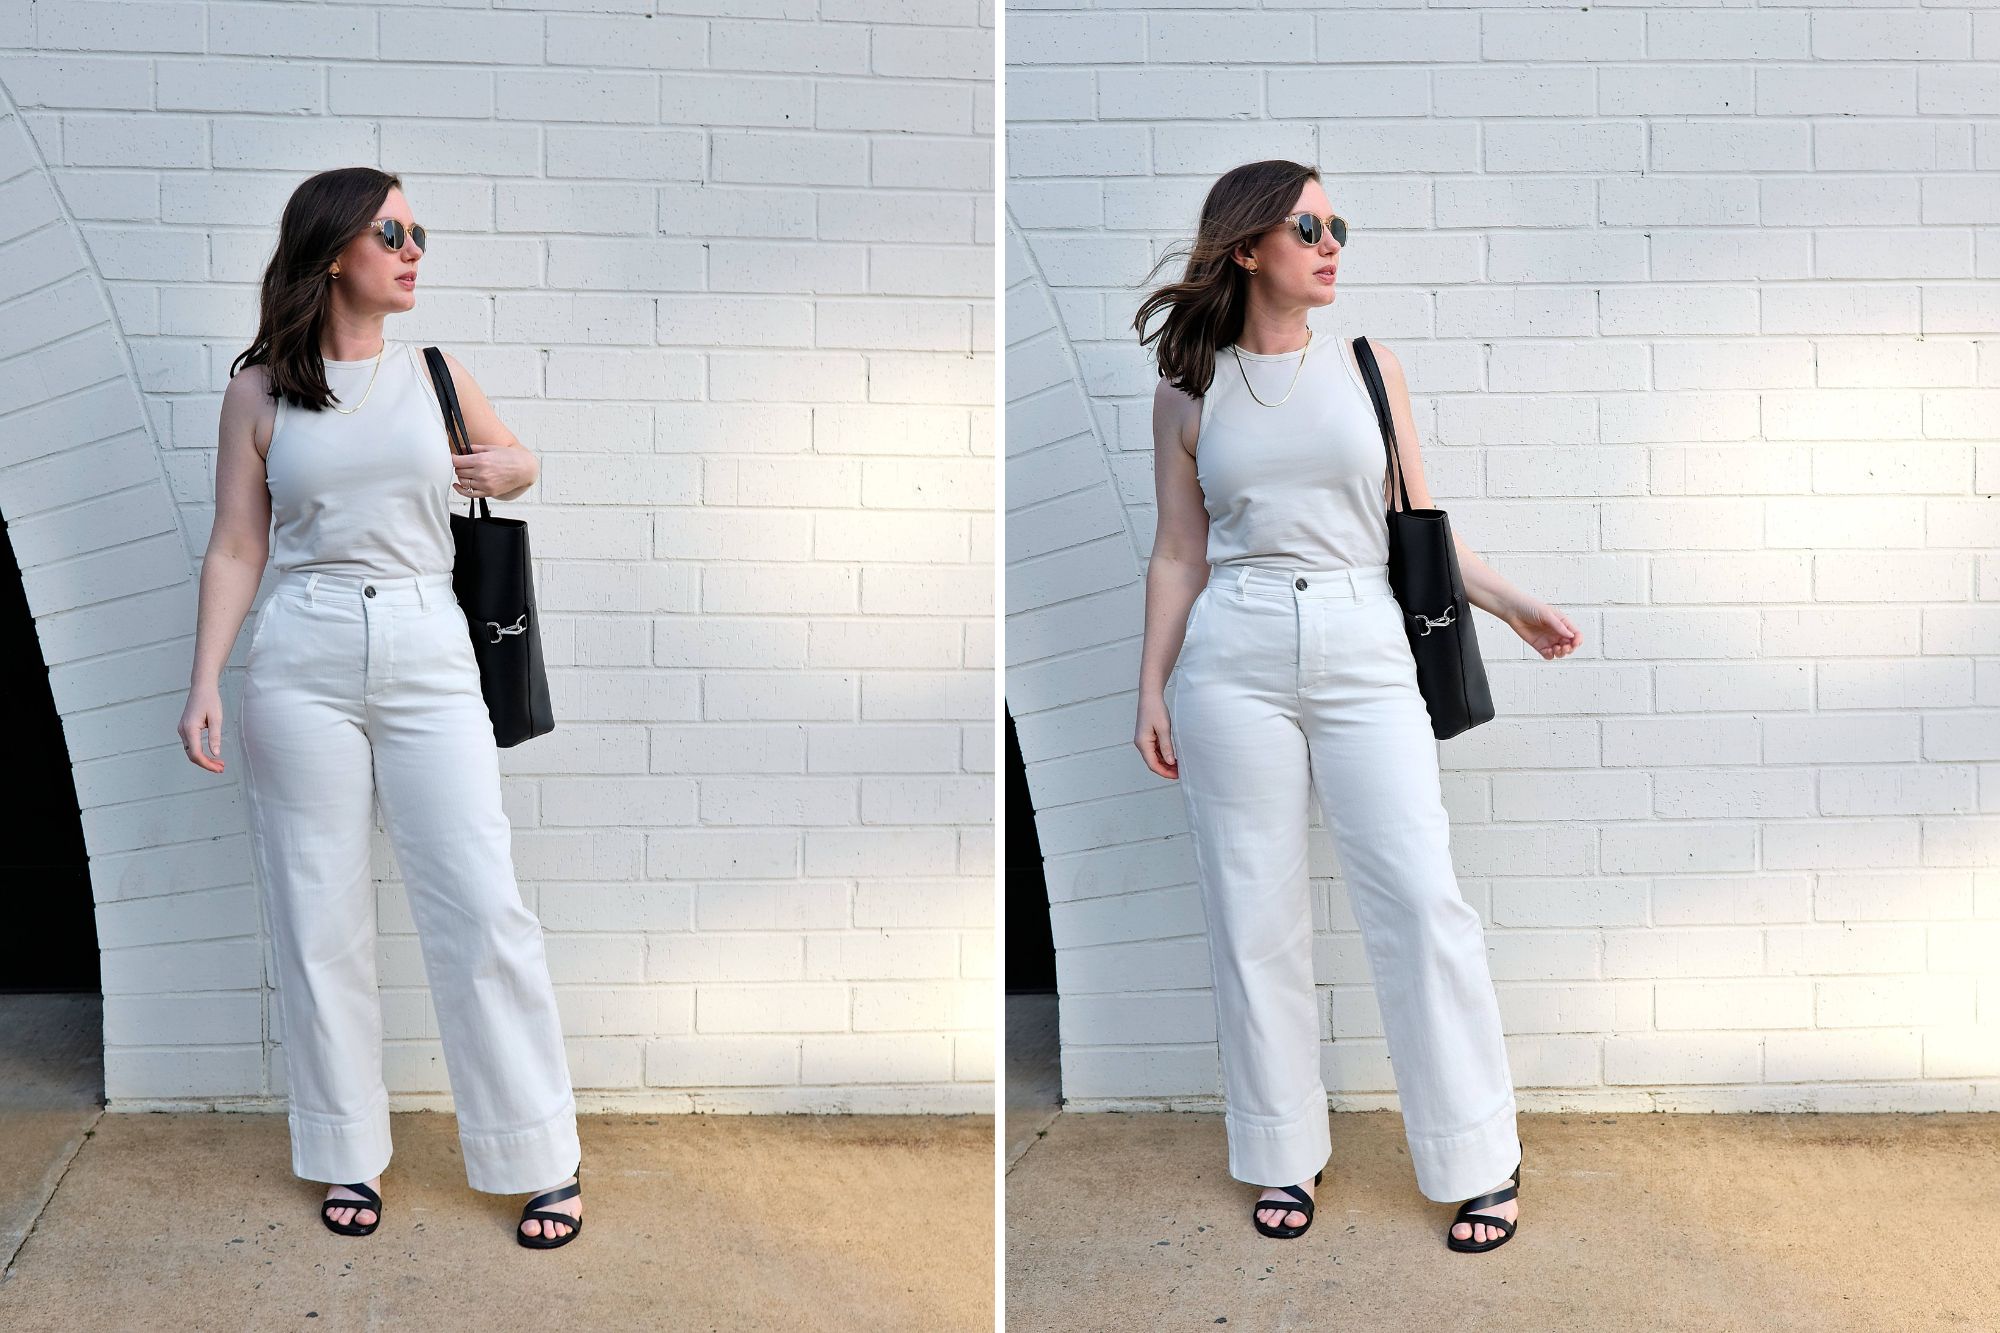 Alyssa wears the Carol High Rise Jeans in two photos